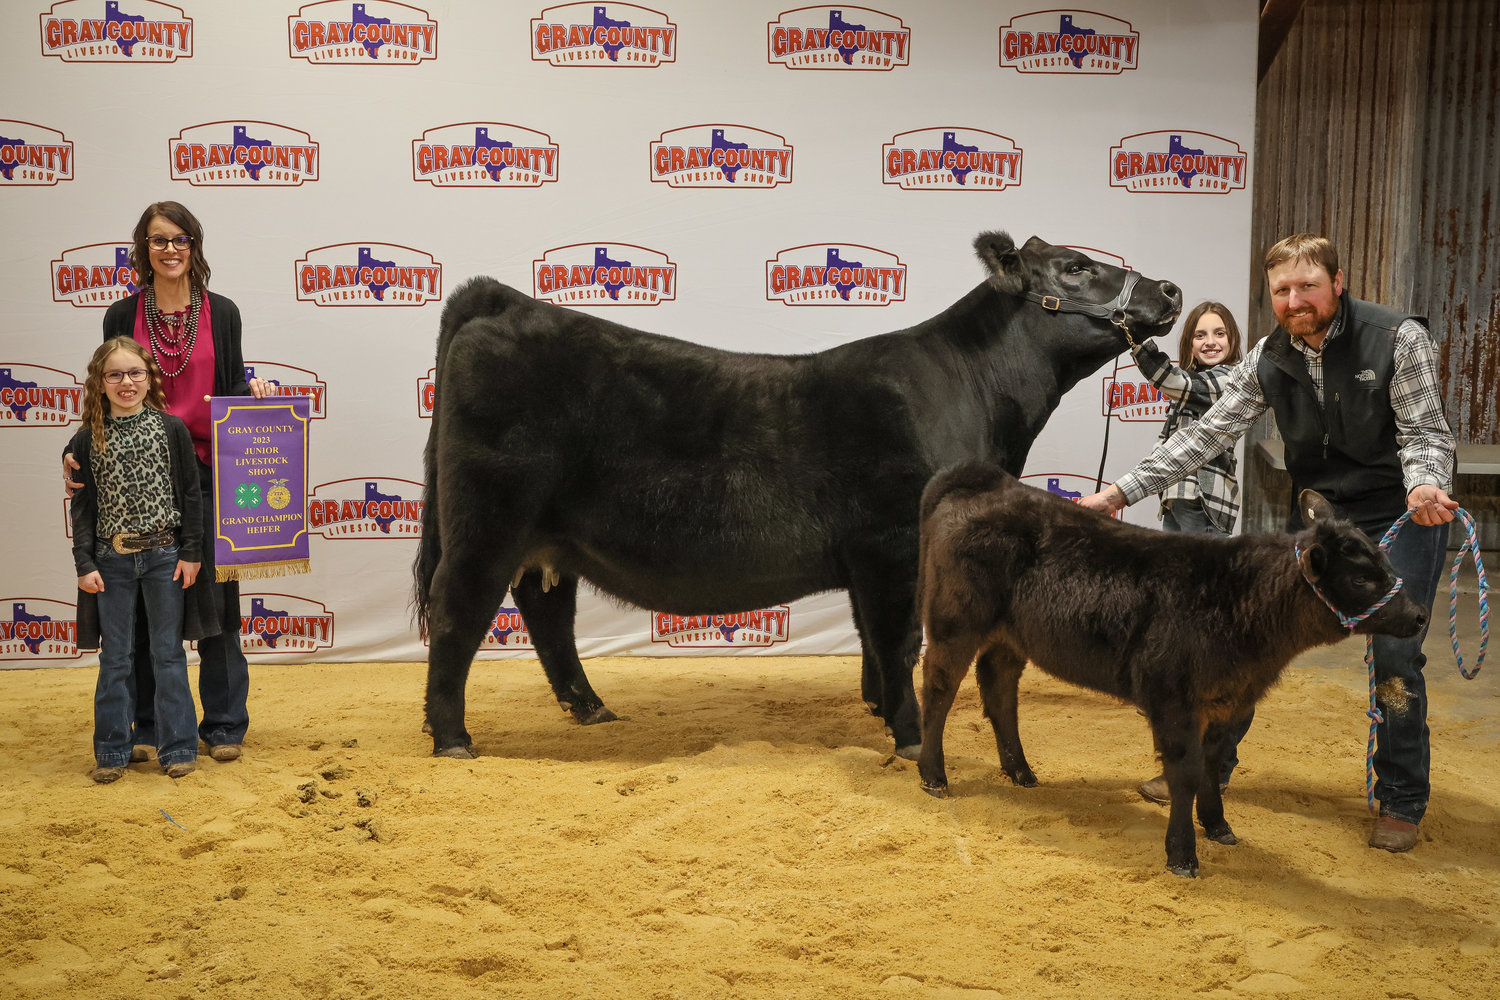 Anleigh Bowers, Grand Champion for Steer and Heifer.